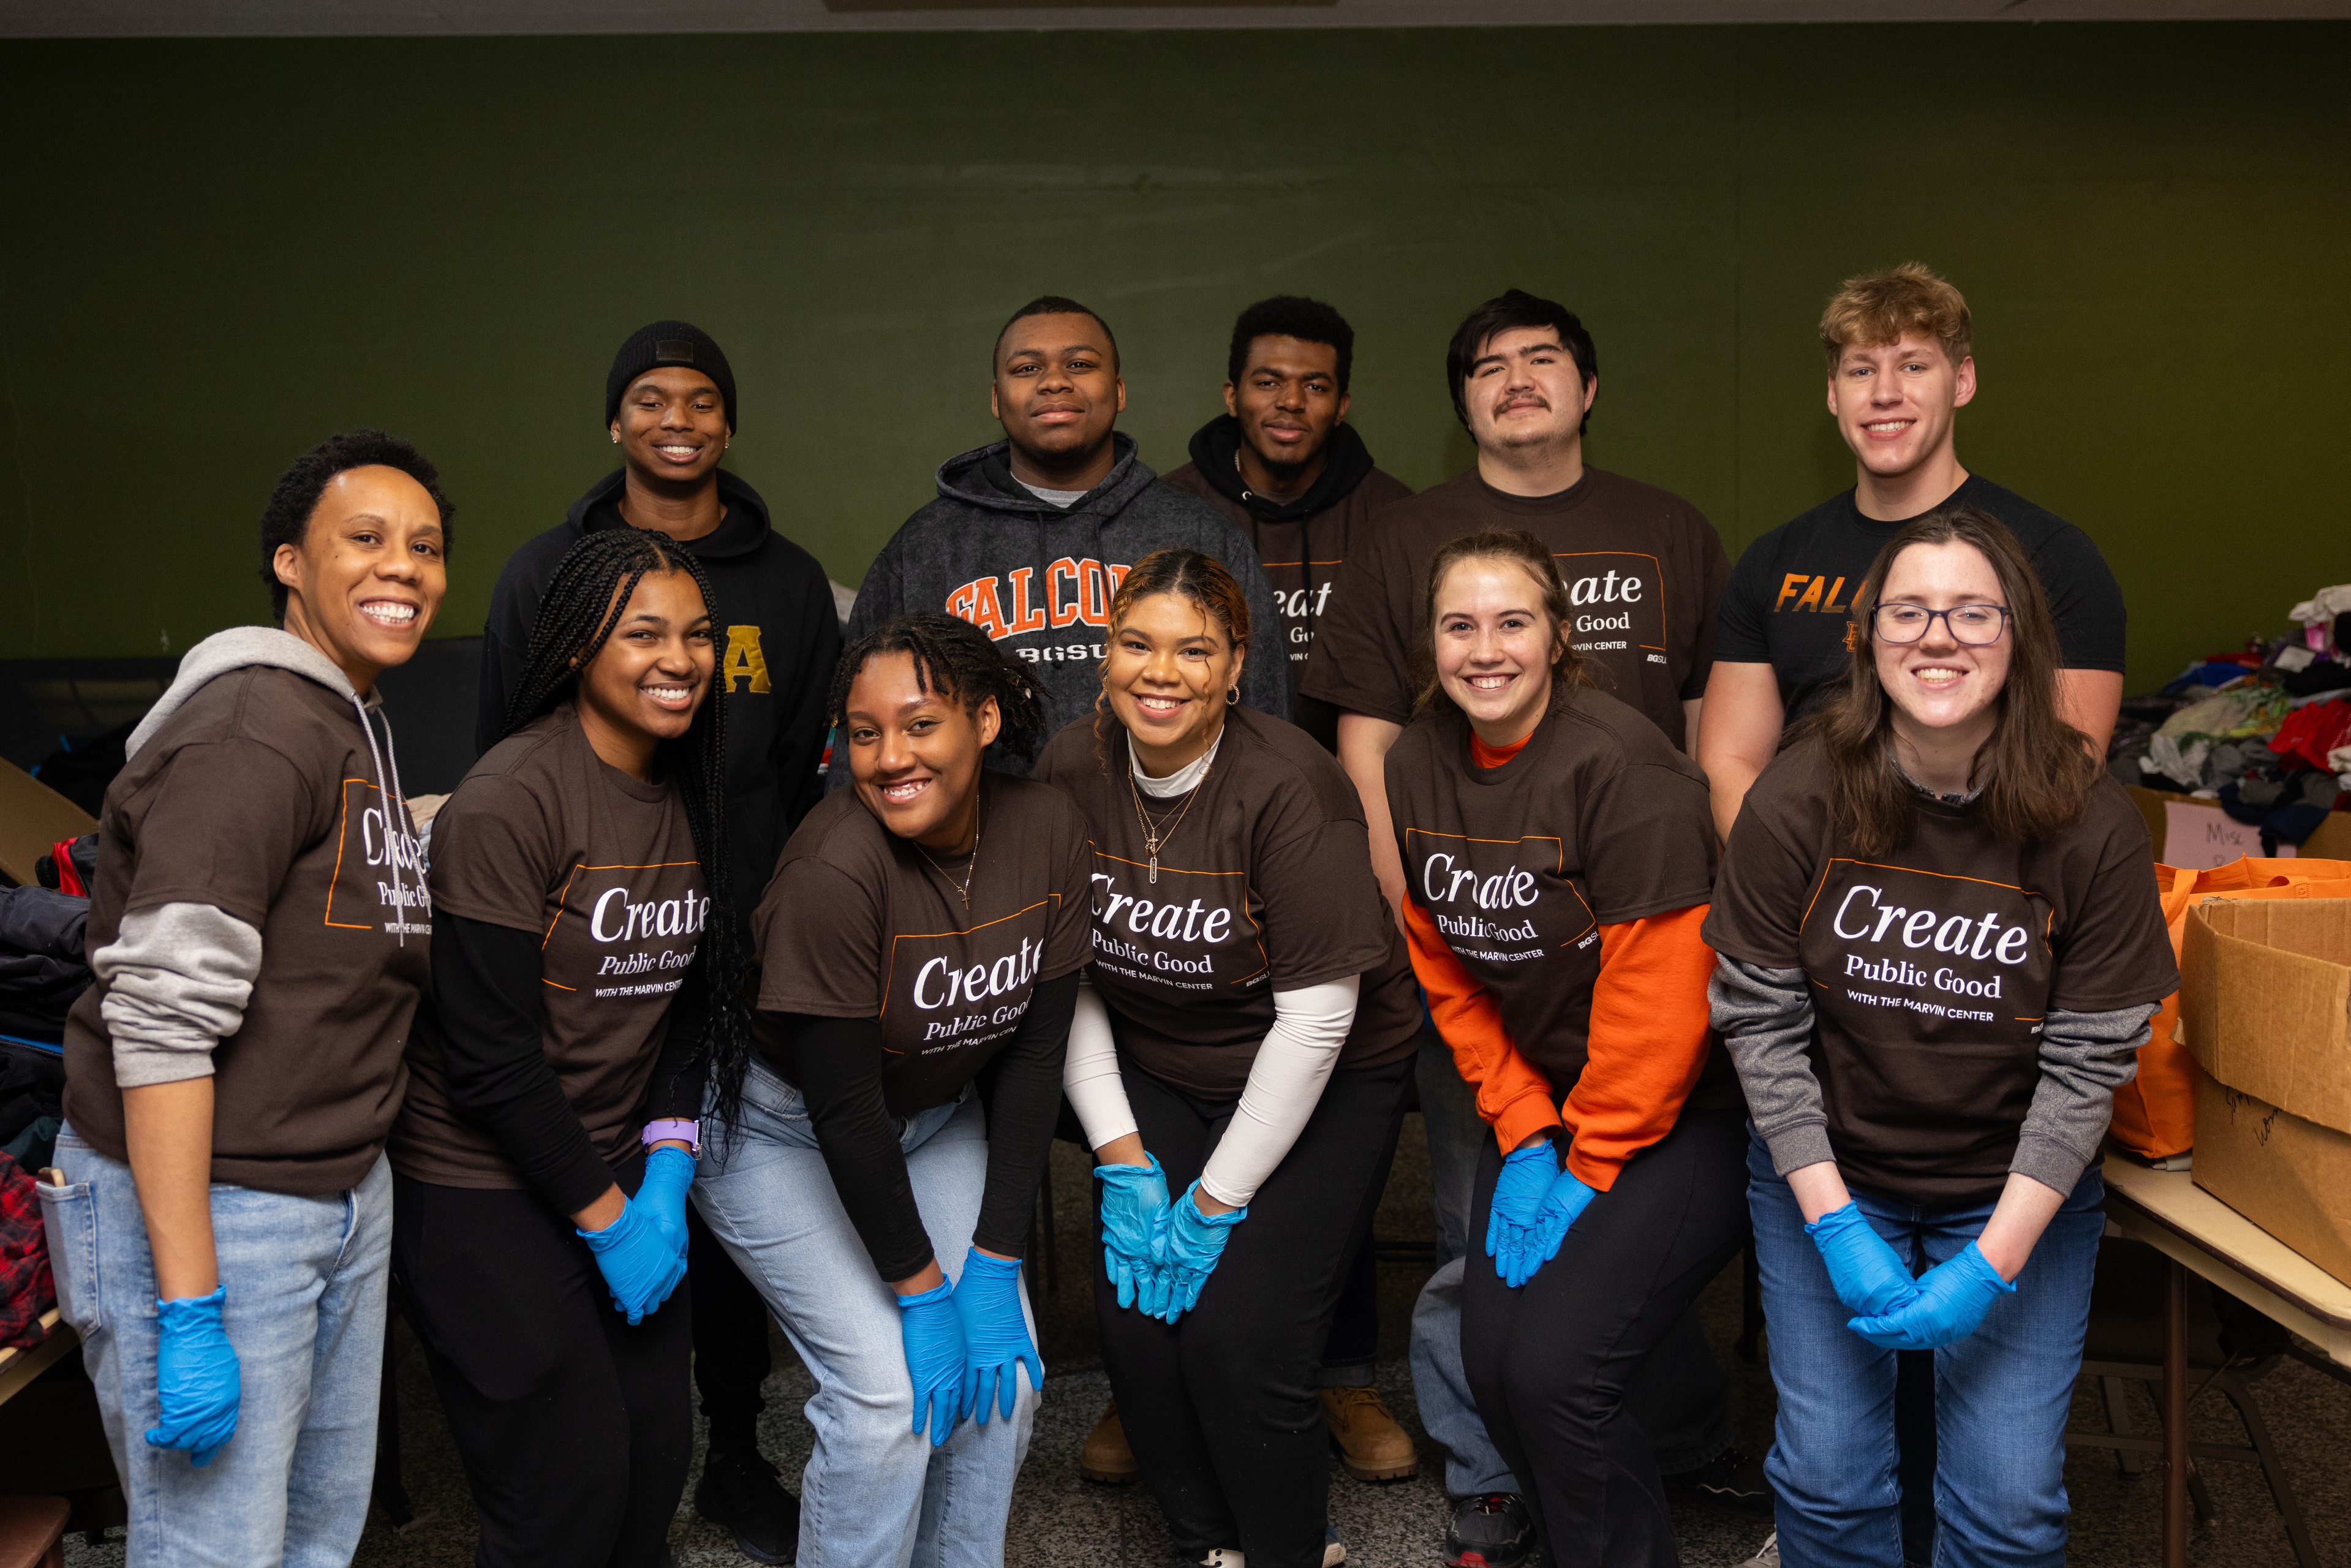 A group of BGSU students and staff wearing shirts that say 'Create public good' pose for a photo. 